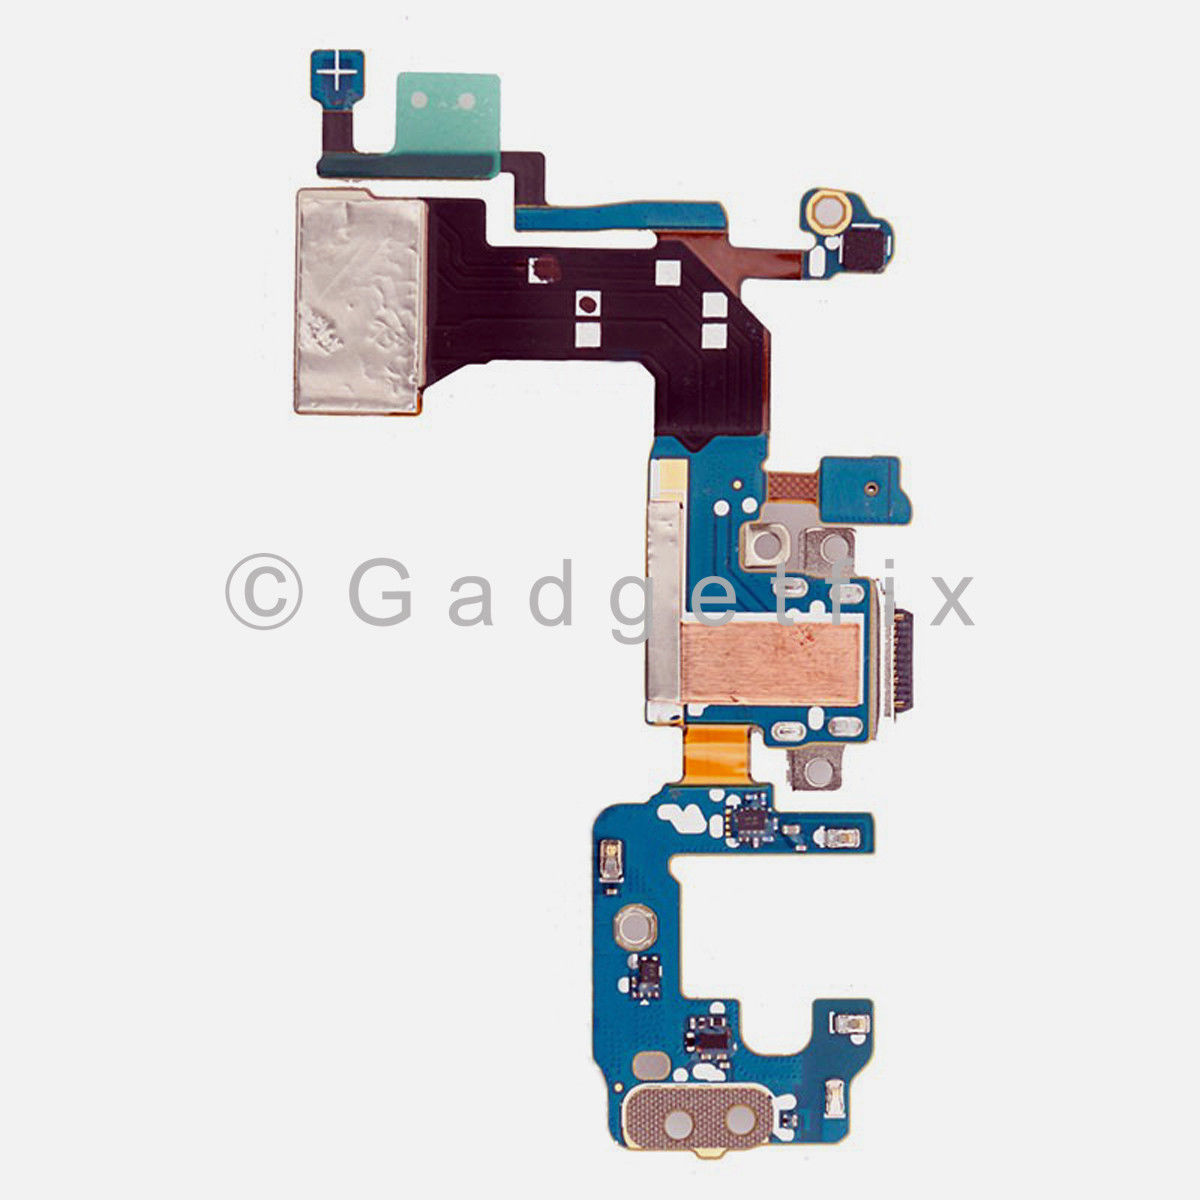 Samsung Galaxy S8 G950U G950A G950T Charger Charging Port Dock Mic Flex Cable